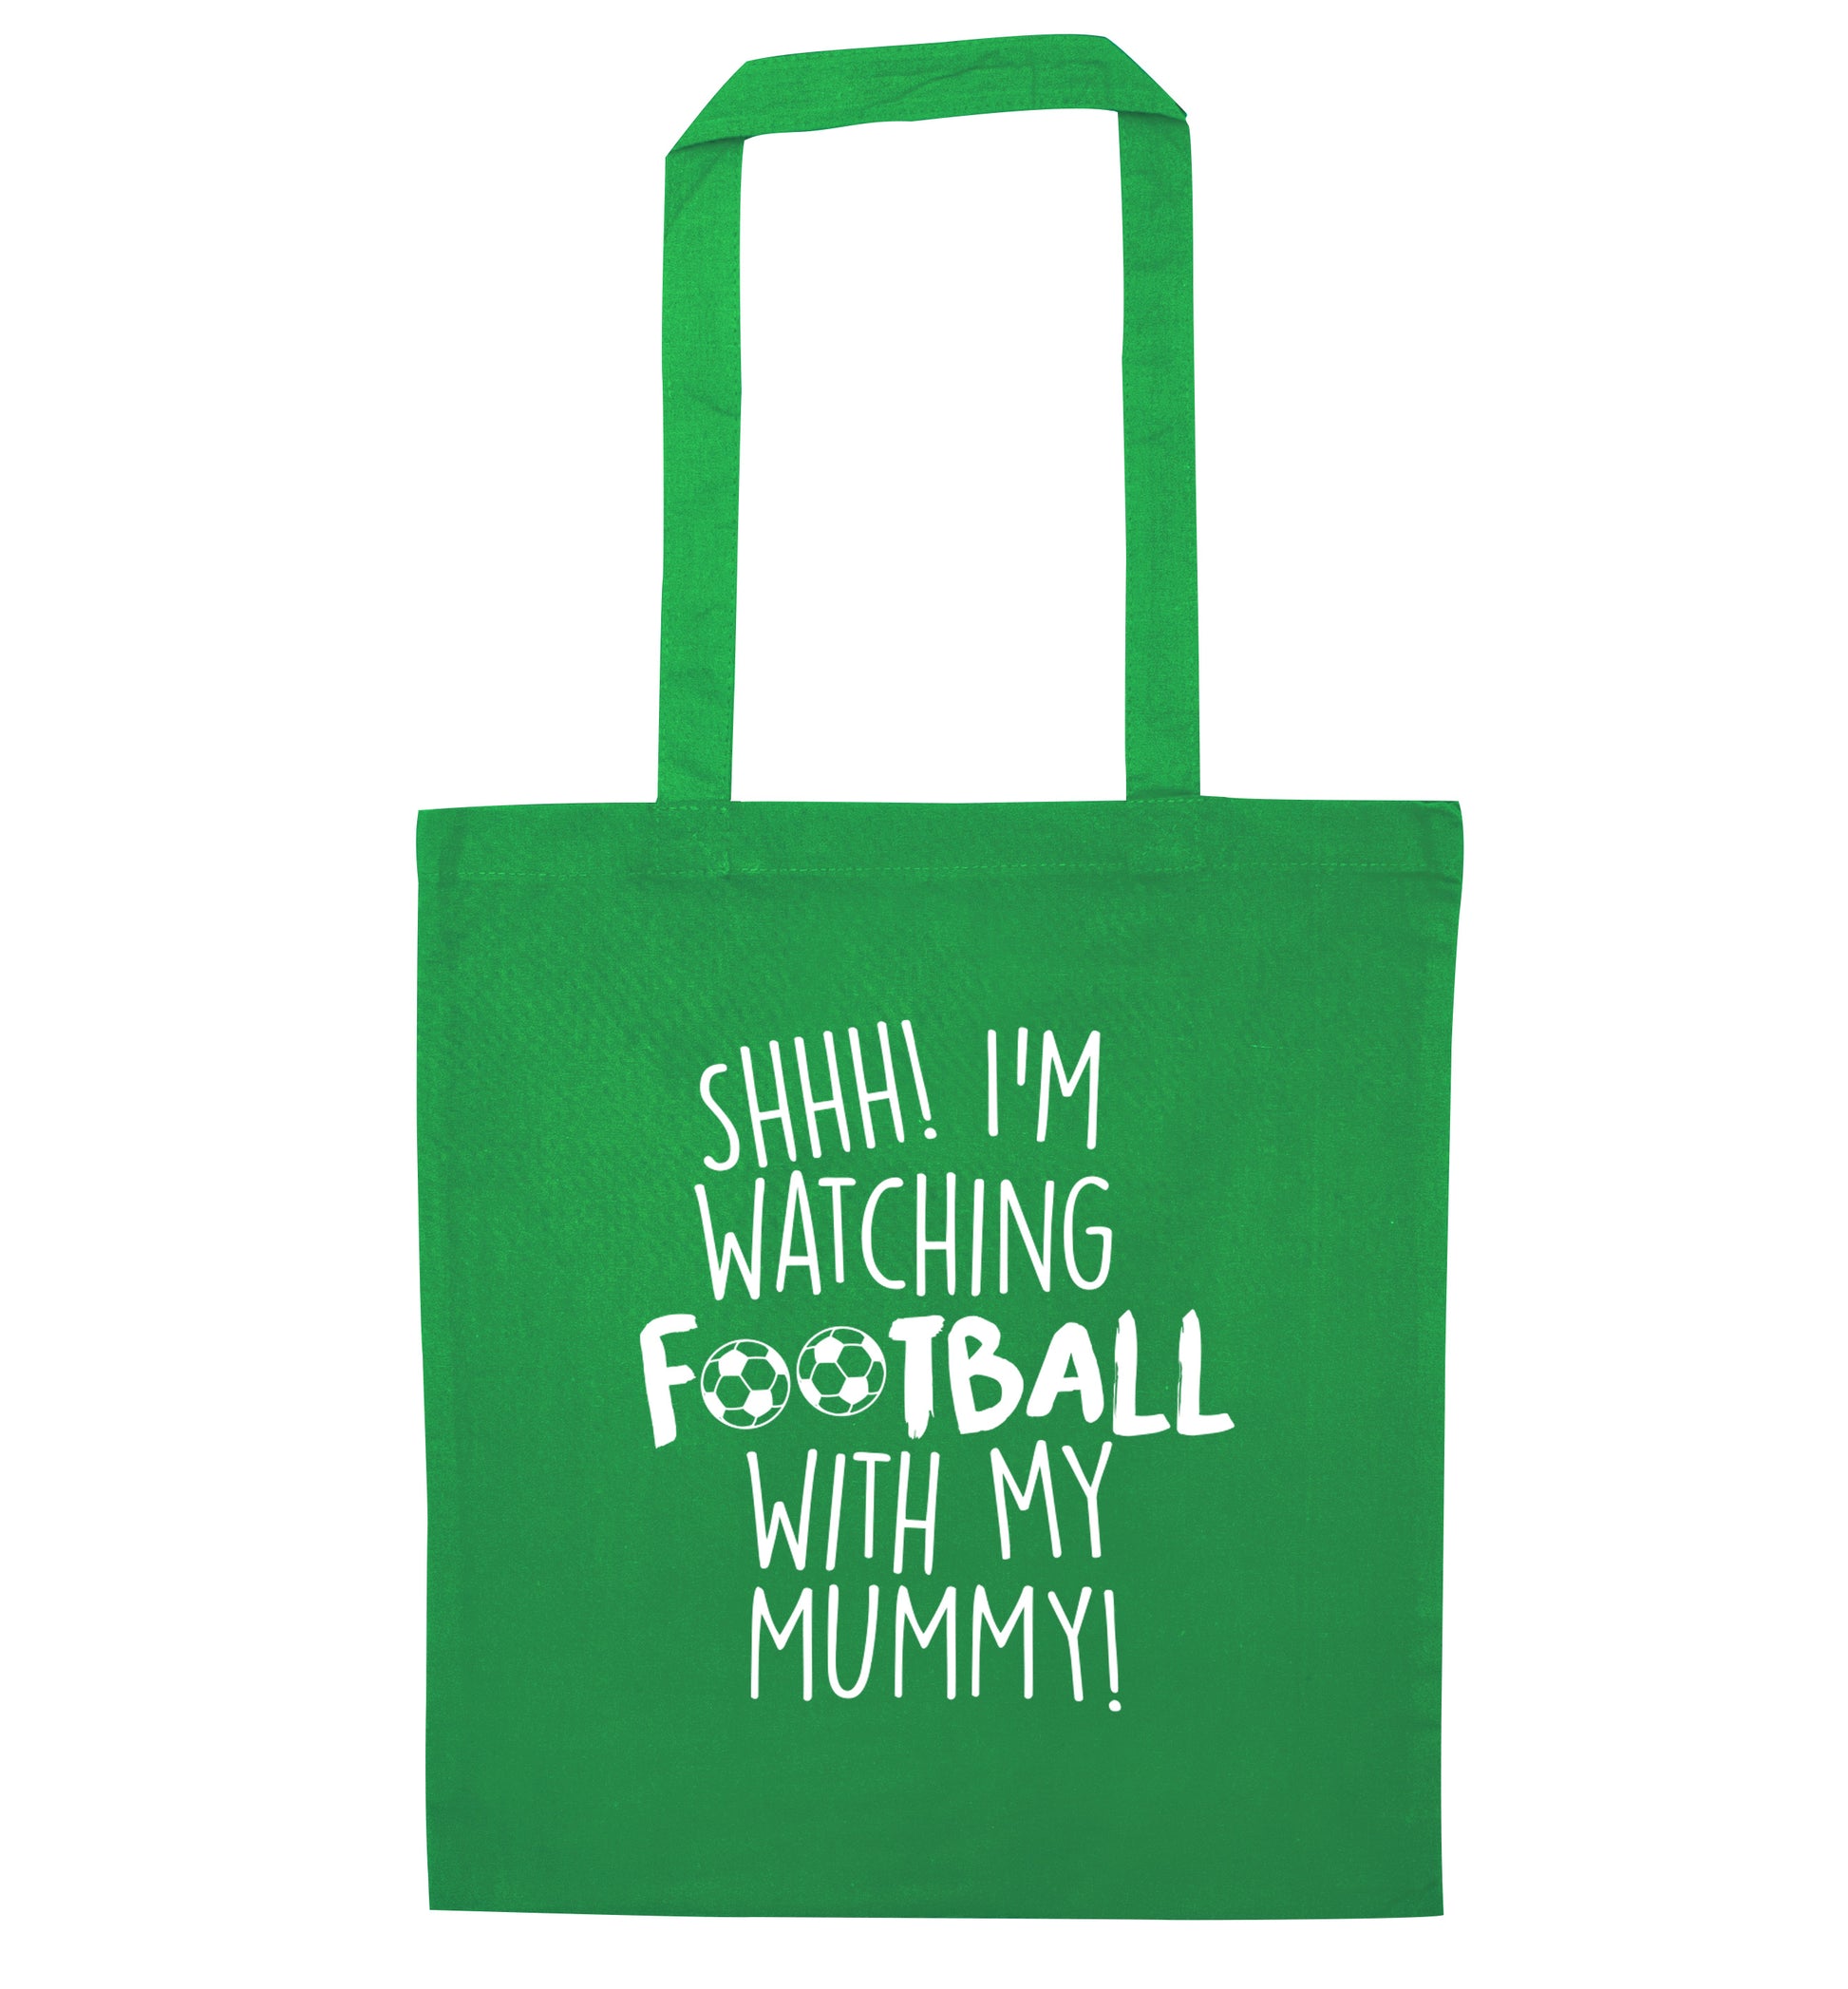 Shhh I'm watching football with my mummy green tote bag